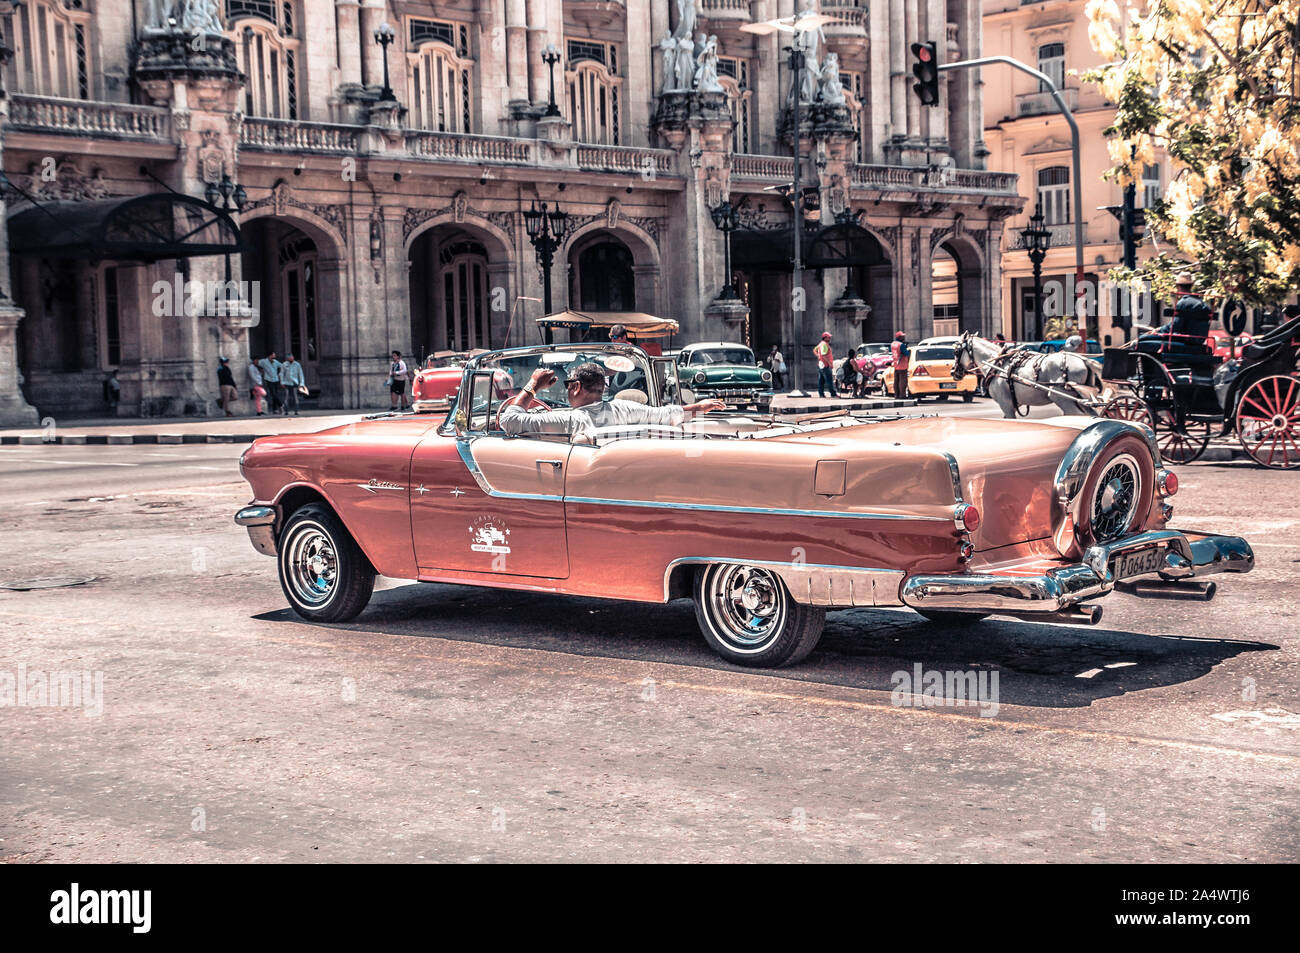 Picture Taken in Cuba, Havana, American Classic, Old Timer Stock Photo